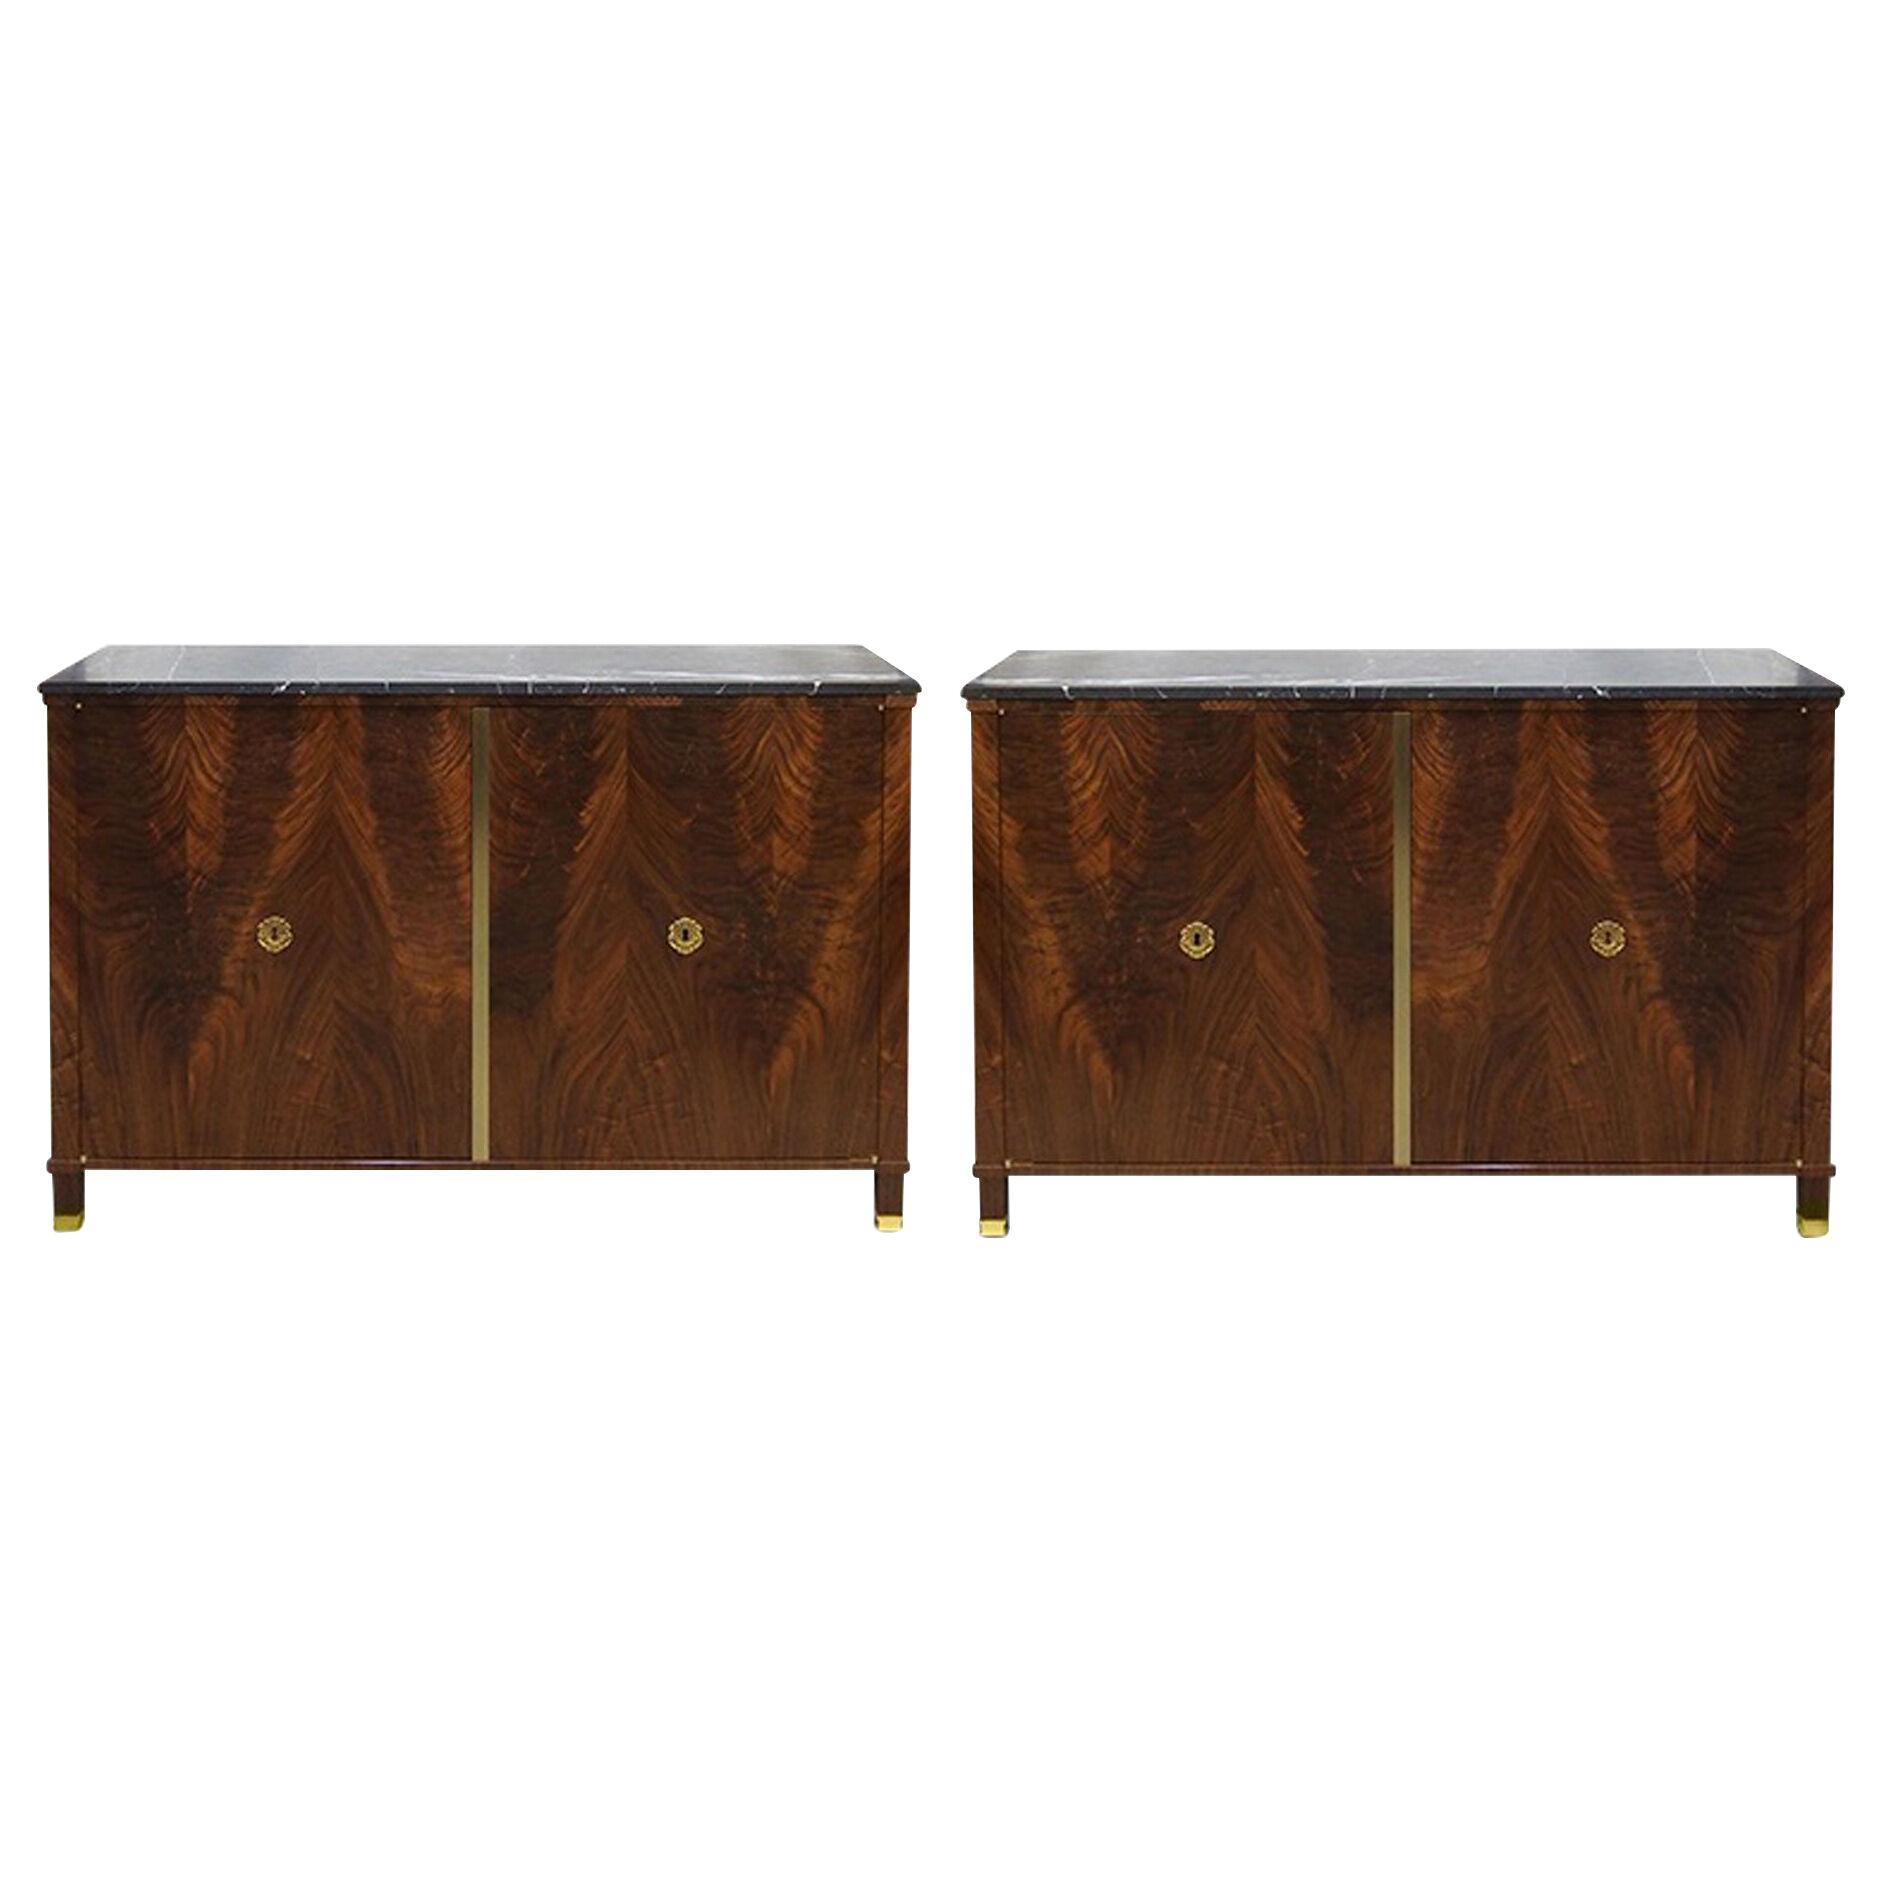 A Pair of Neoclassical Cabinets